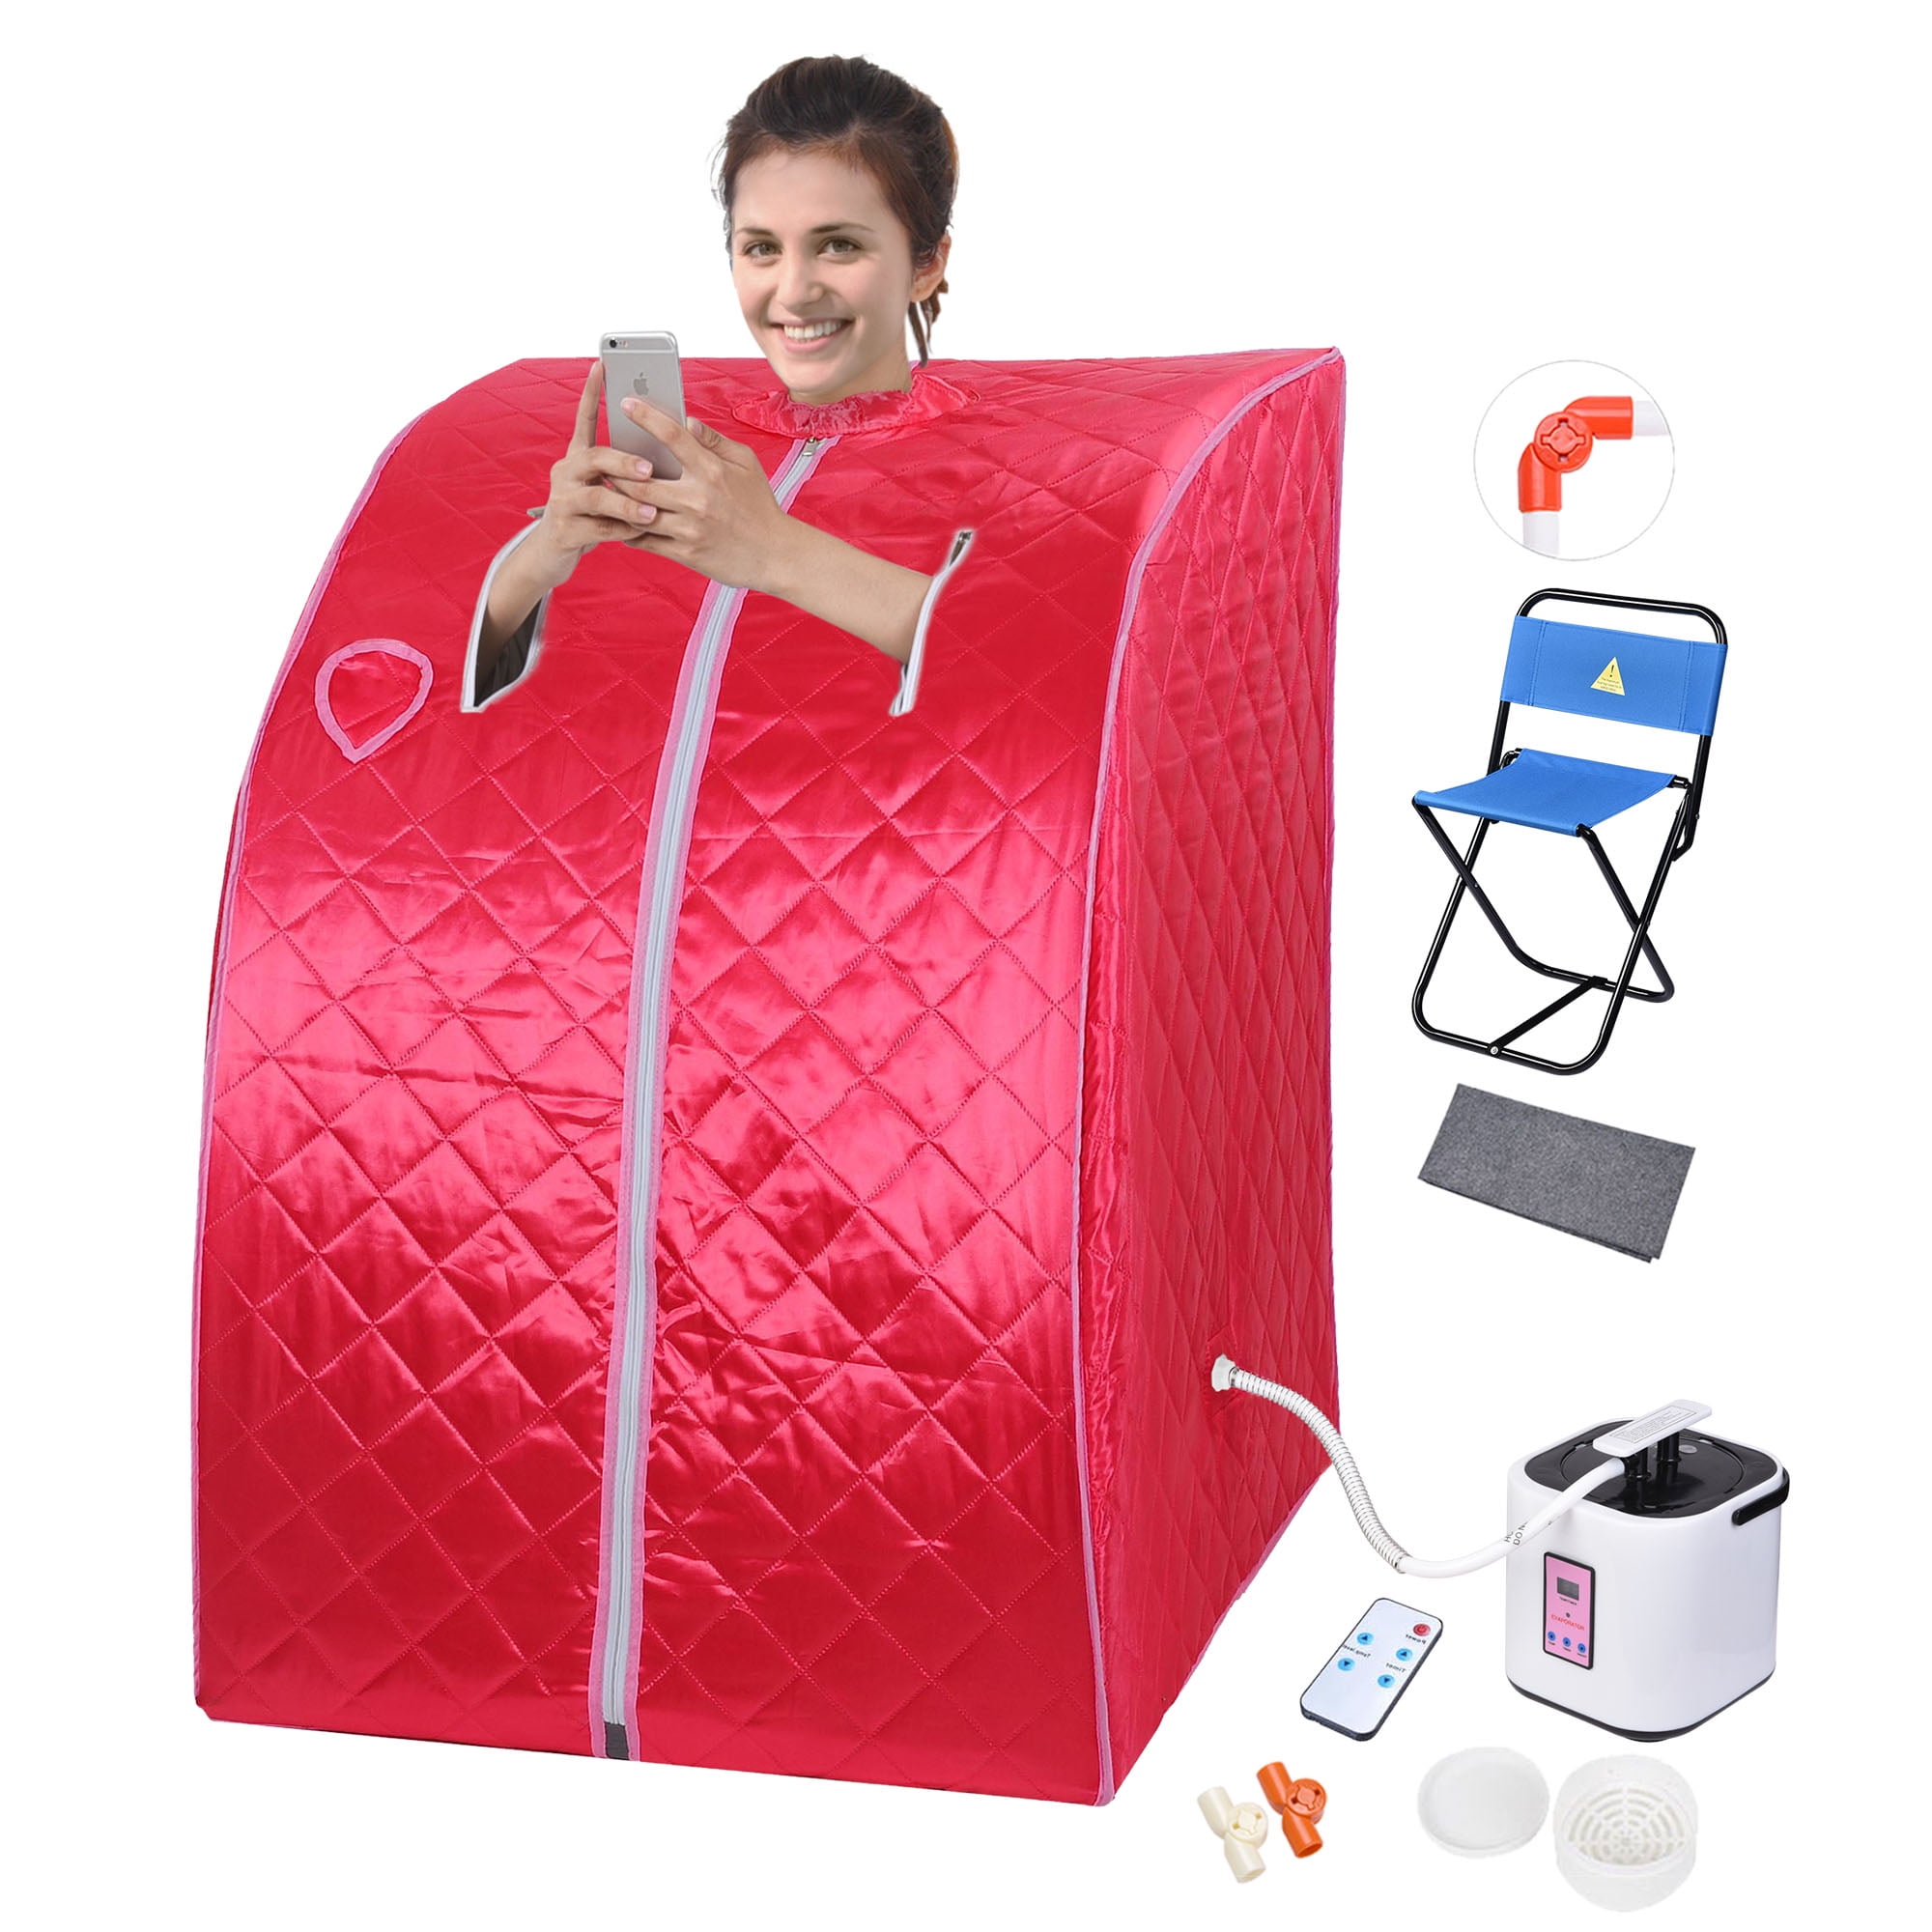 2.6L Portable Steam Sauna SPA Tent Slimming Loss Weight Detox Therapy+Chair Home 